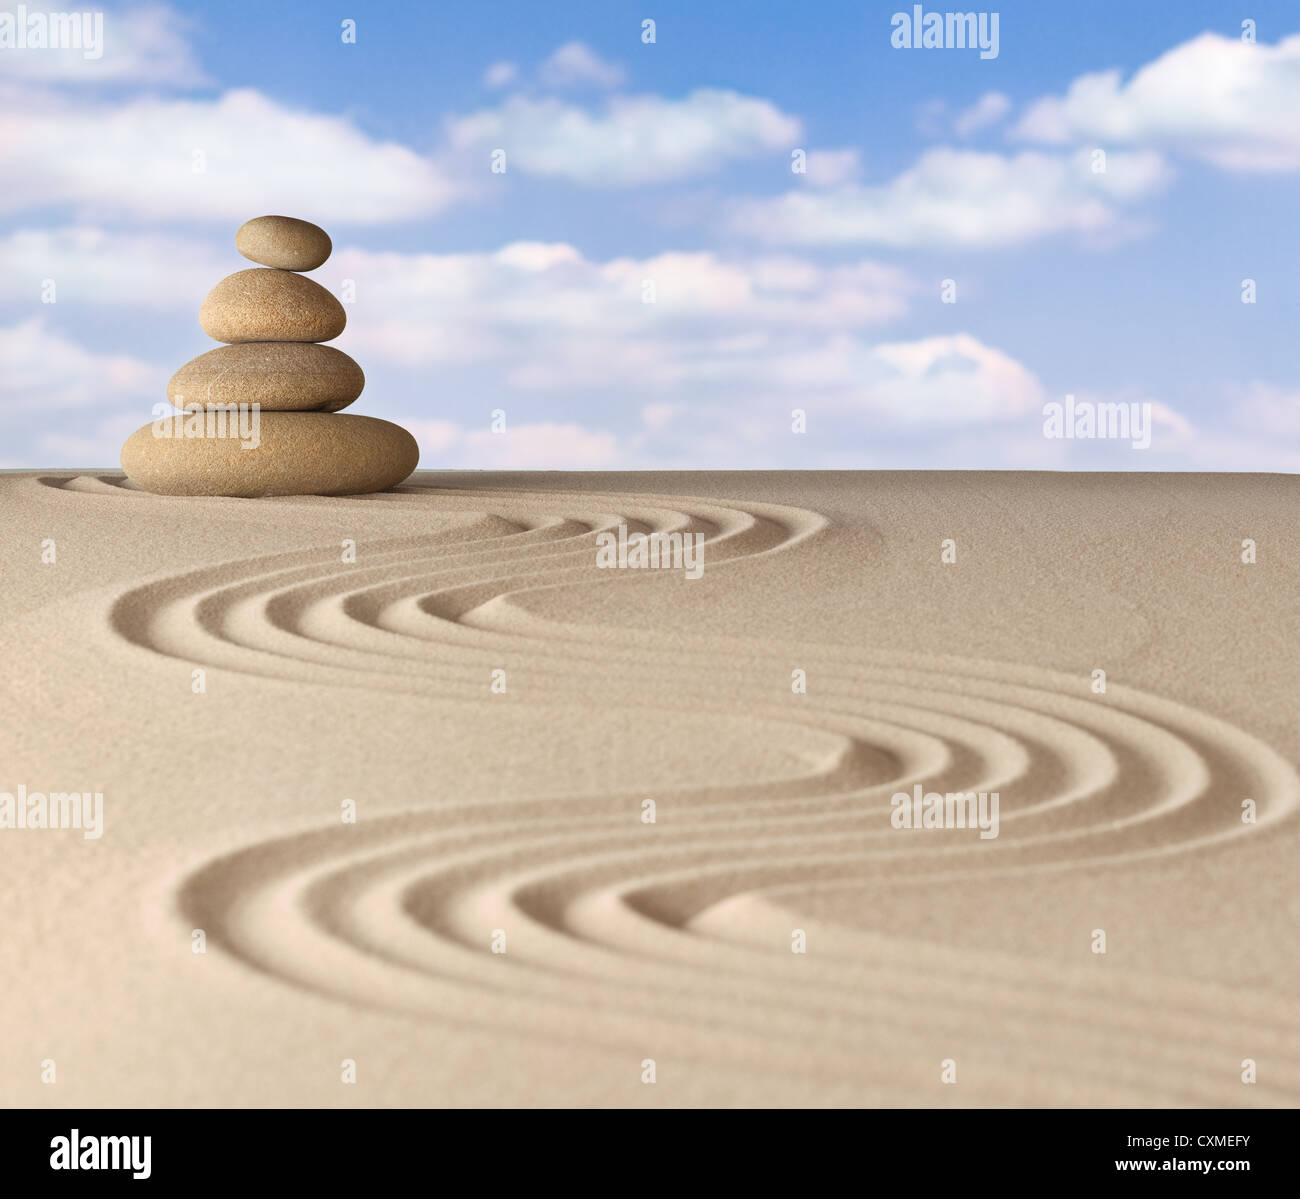 harmony and purity for meditation in japanese zen garden balance between sand and stones Stock Photo